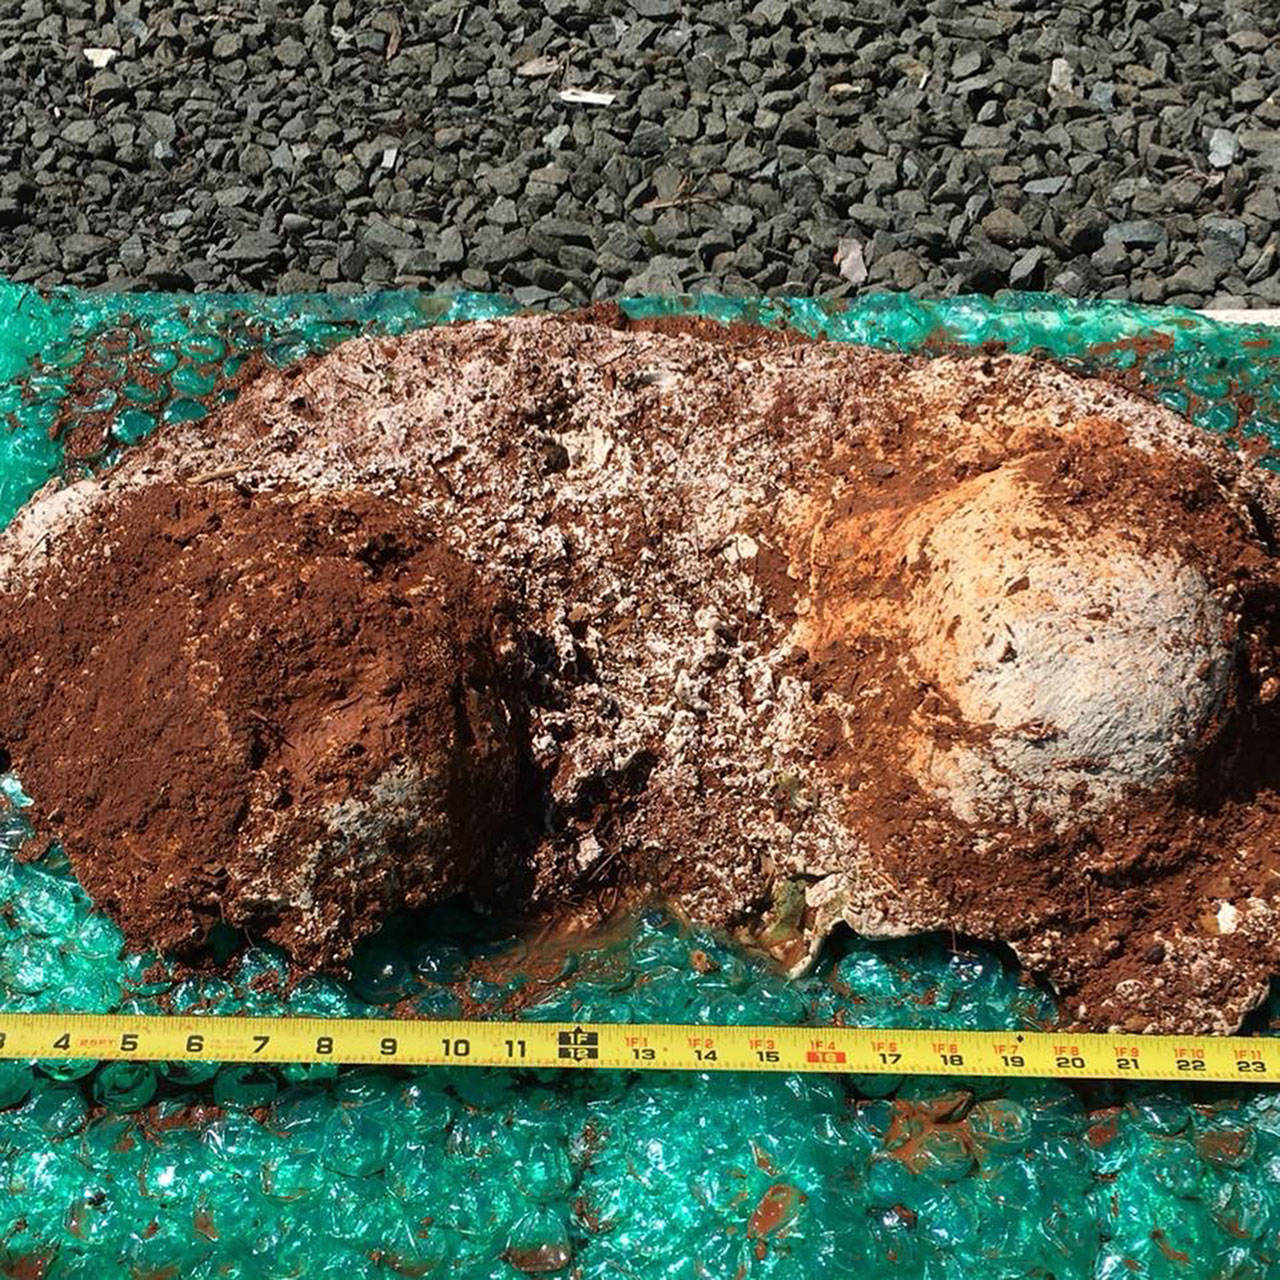 Pictured are what Sasquatch researcher and paranormal podcast host Tobe Johnson believes to be Bigfoot knee prints, which he found in Cottage Grove, Oregon. The knee prints also came with suspected hair samples, which were reportedly unable to be identified. Photo courtesy Tobe Johnson